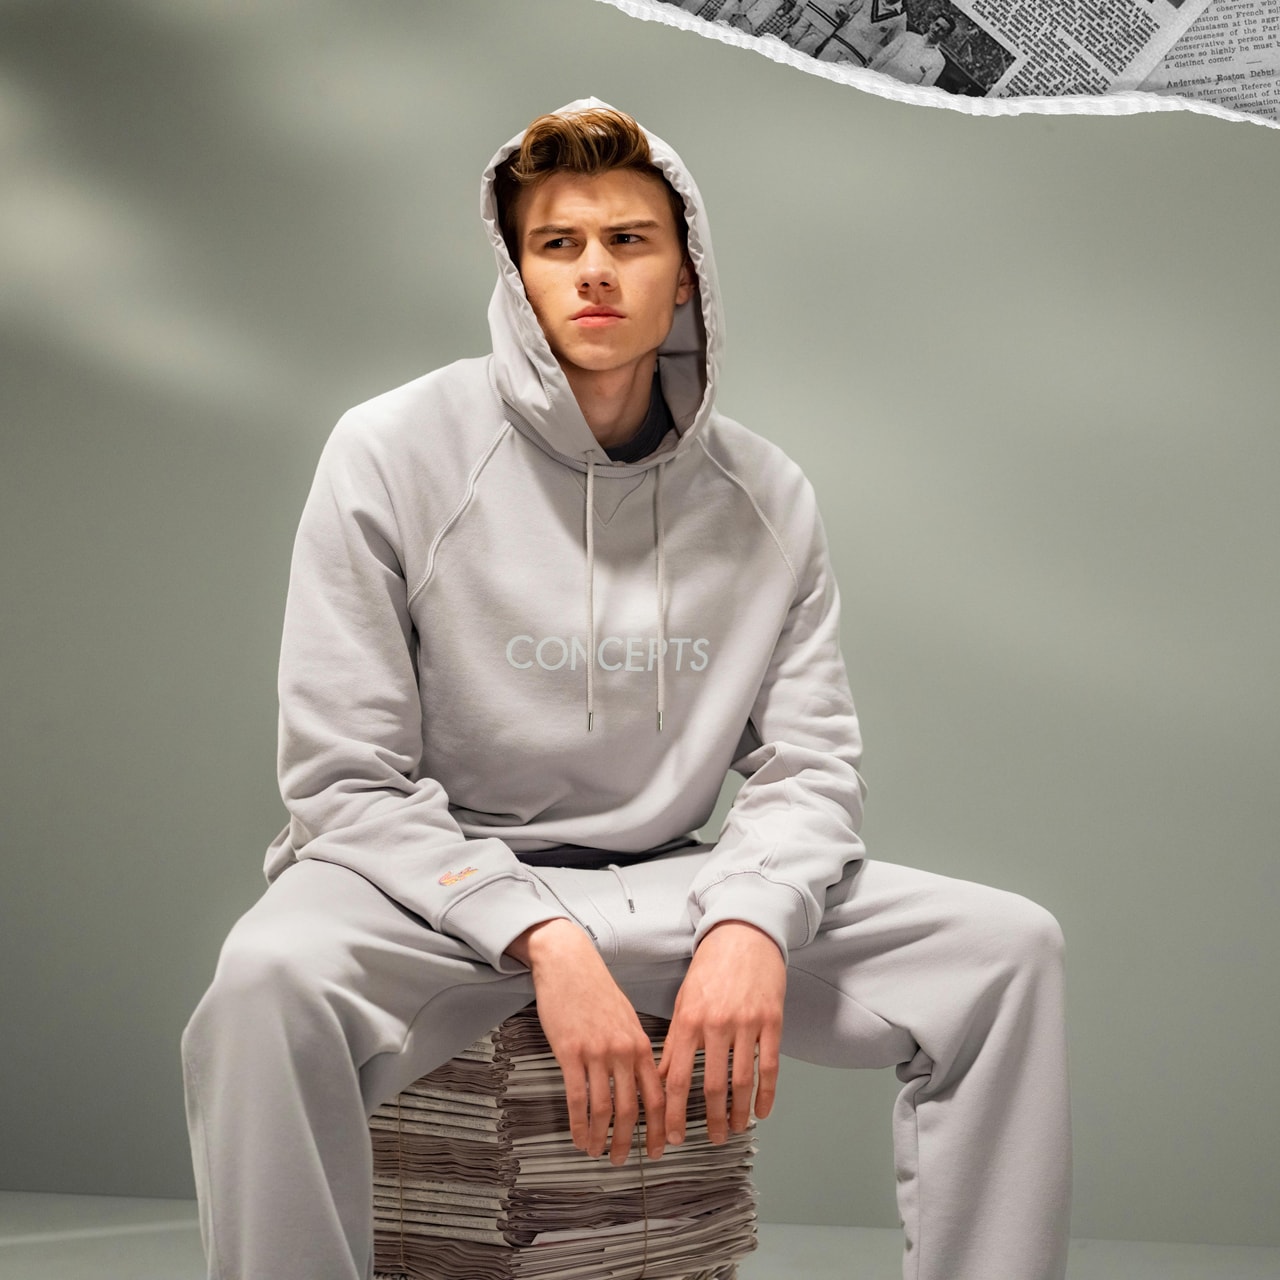 lacoste concepts storm 96 sneaker release info drop date Boston when available limited edition where to cop clothing apparel august 14 2020